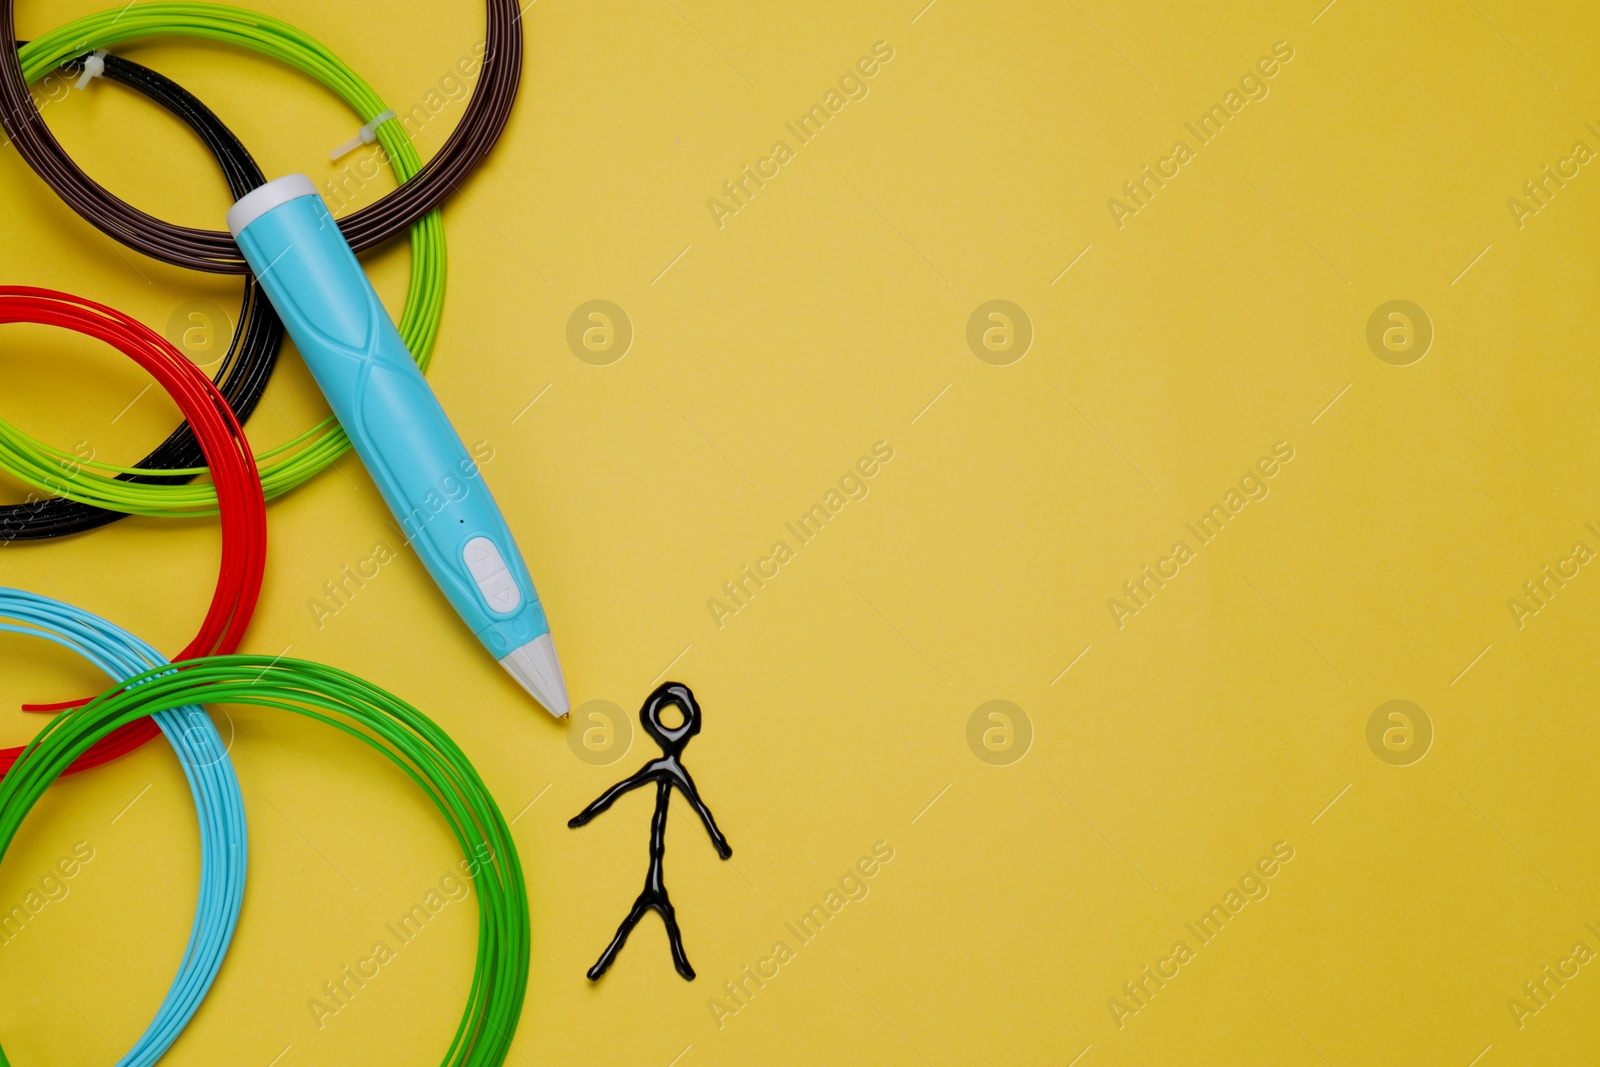 Photo of Stylish 3D pen, colorful plastic filaments and human figure on yellow background, flat lay. Space for text